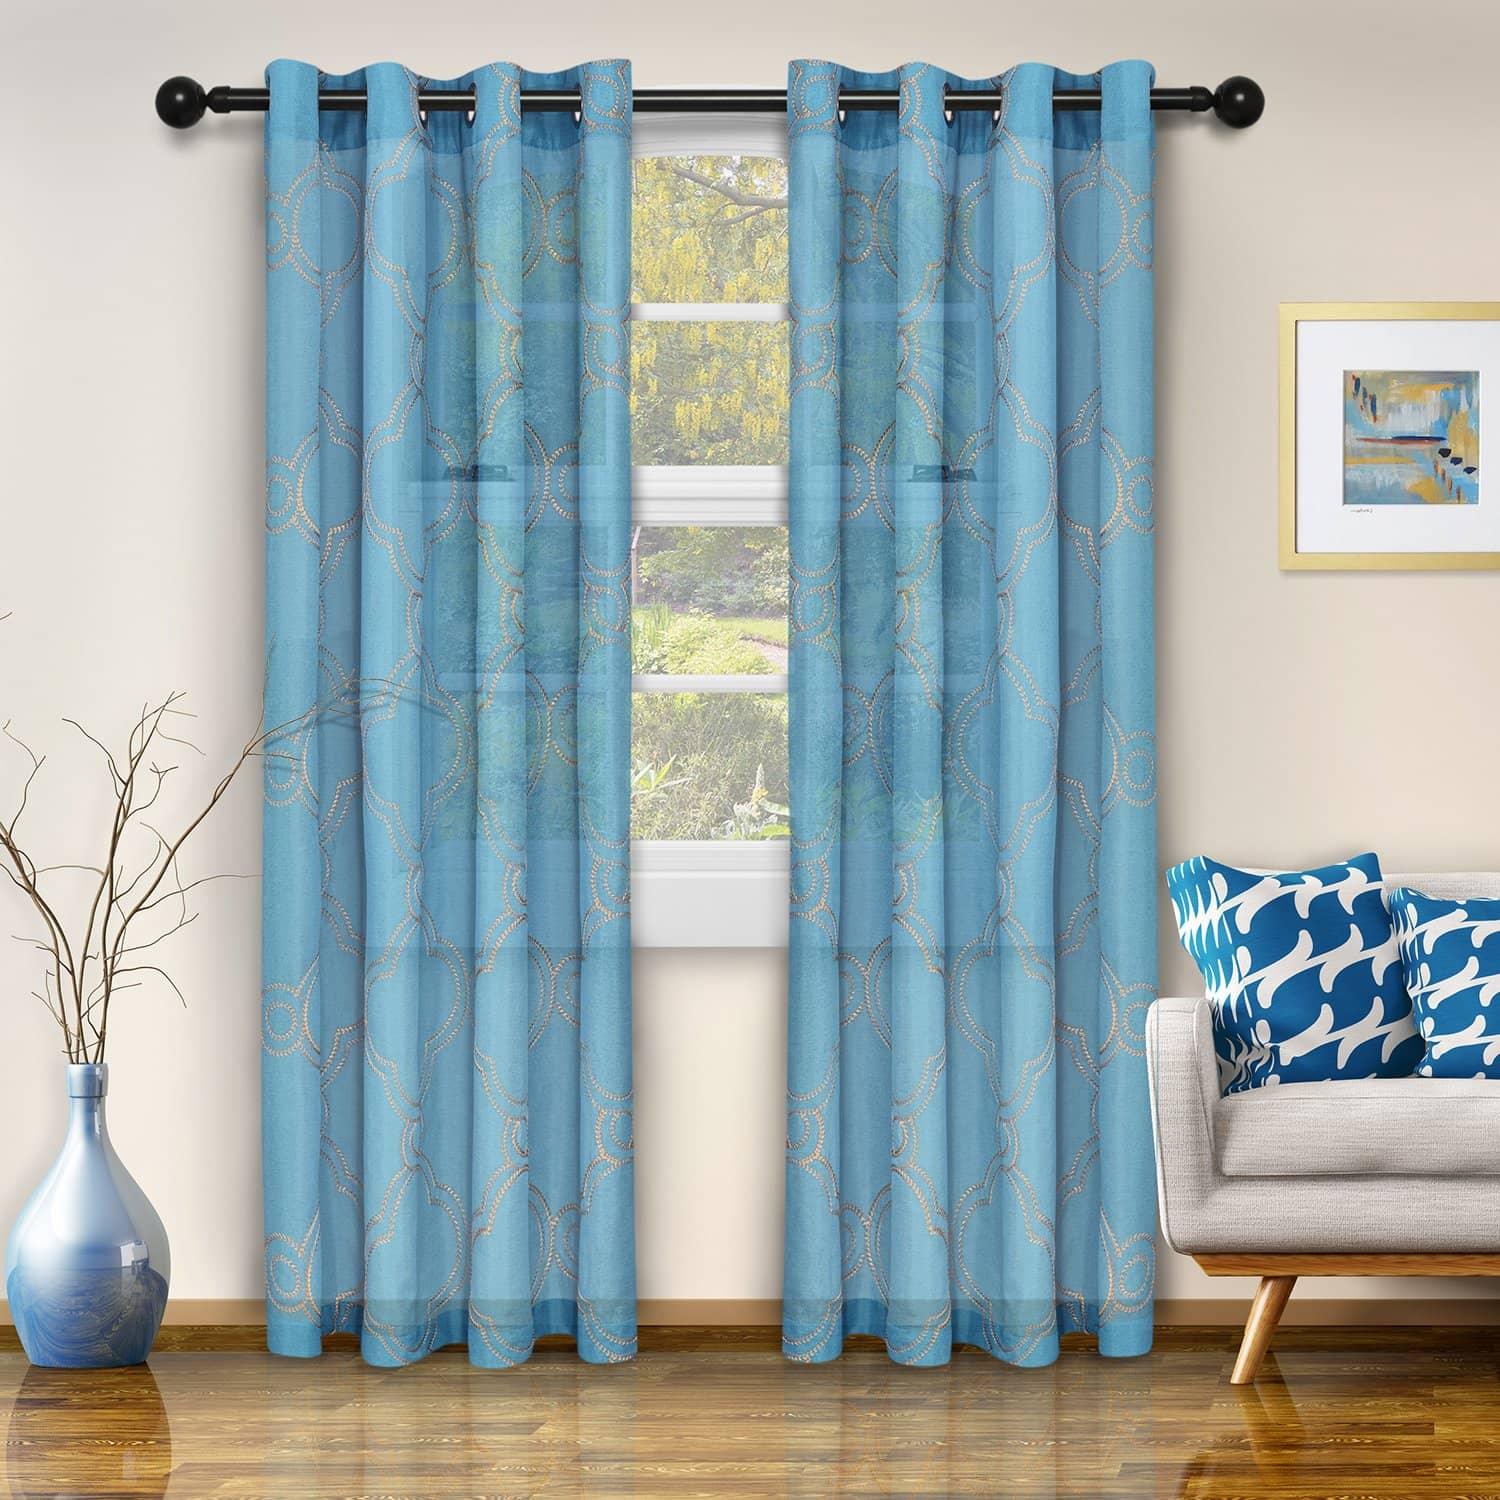 Are Semi-Sheer Curtains Right For You? - Home City Inc